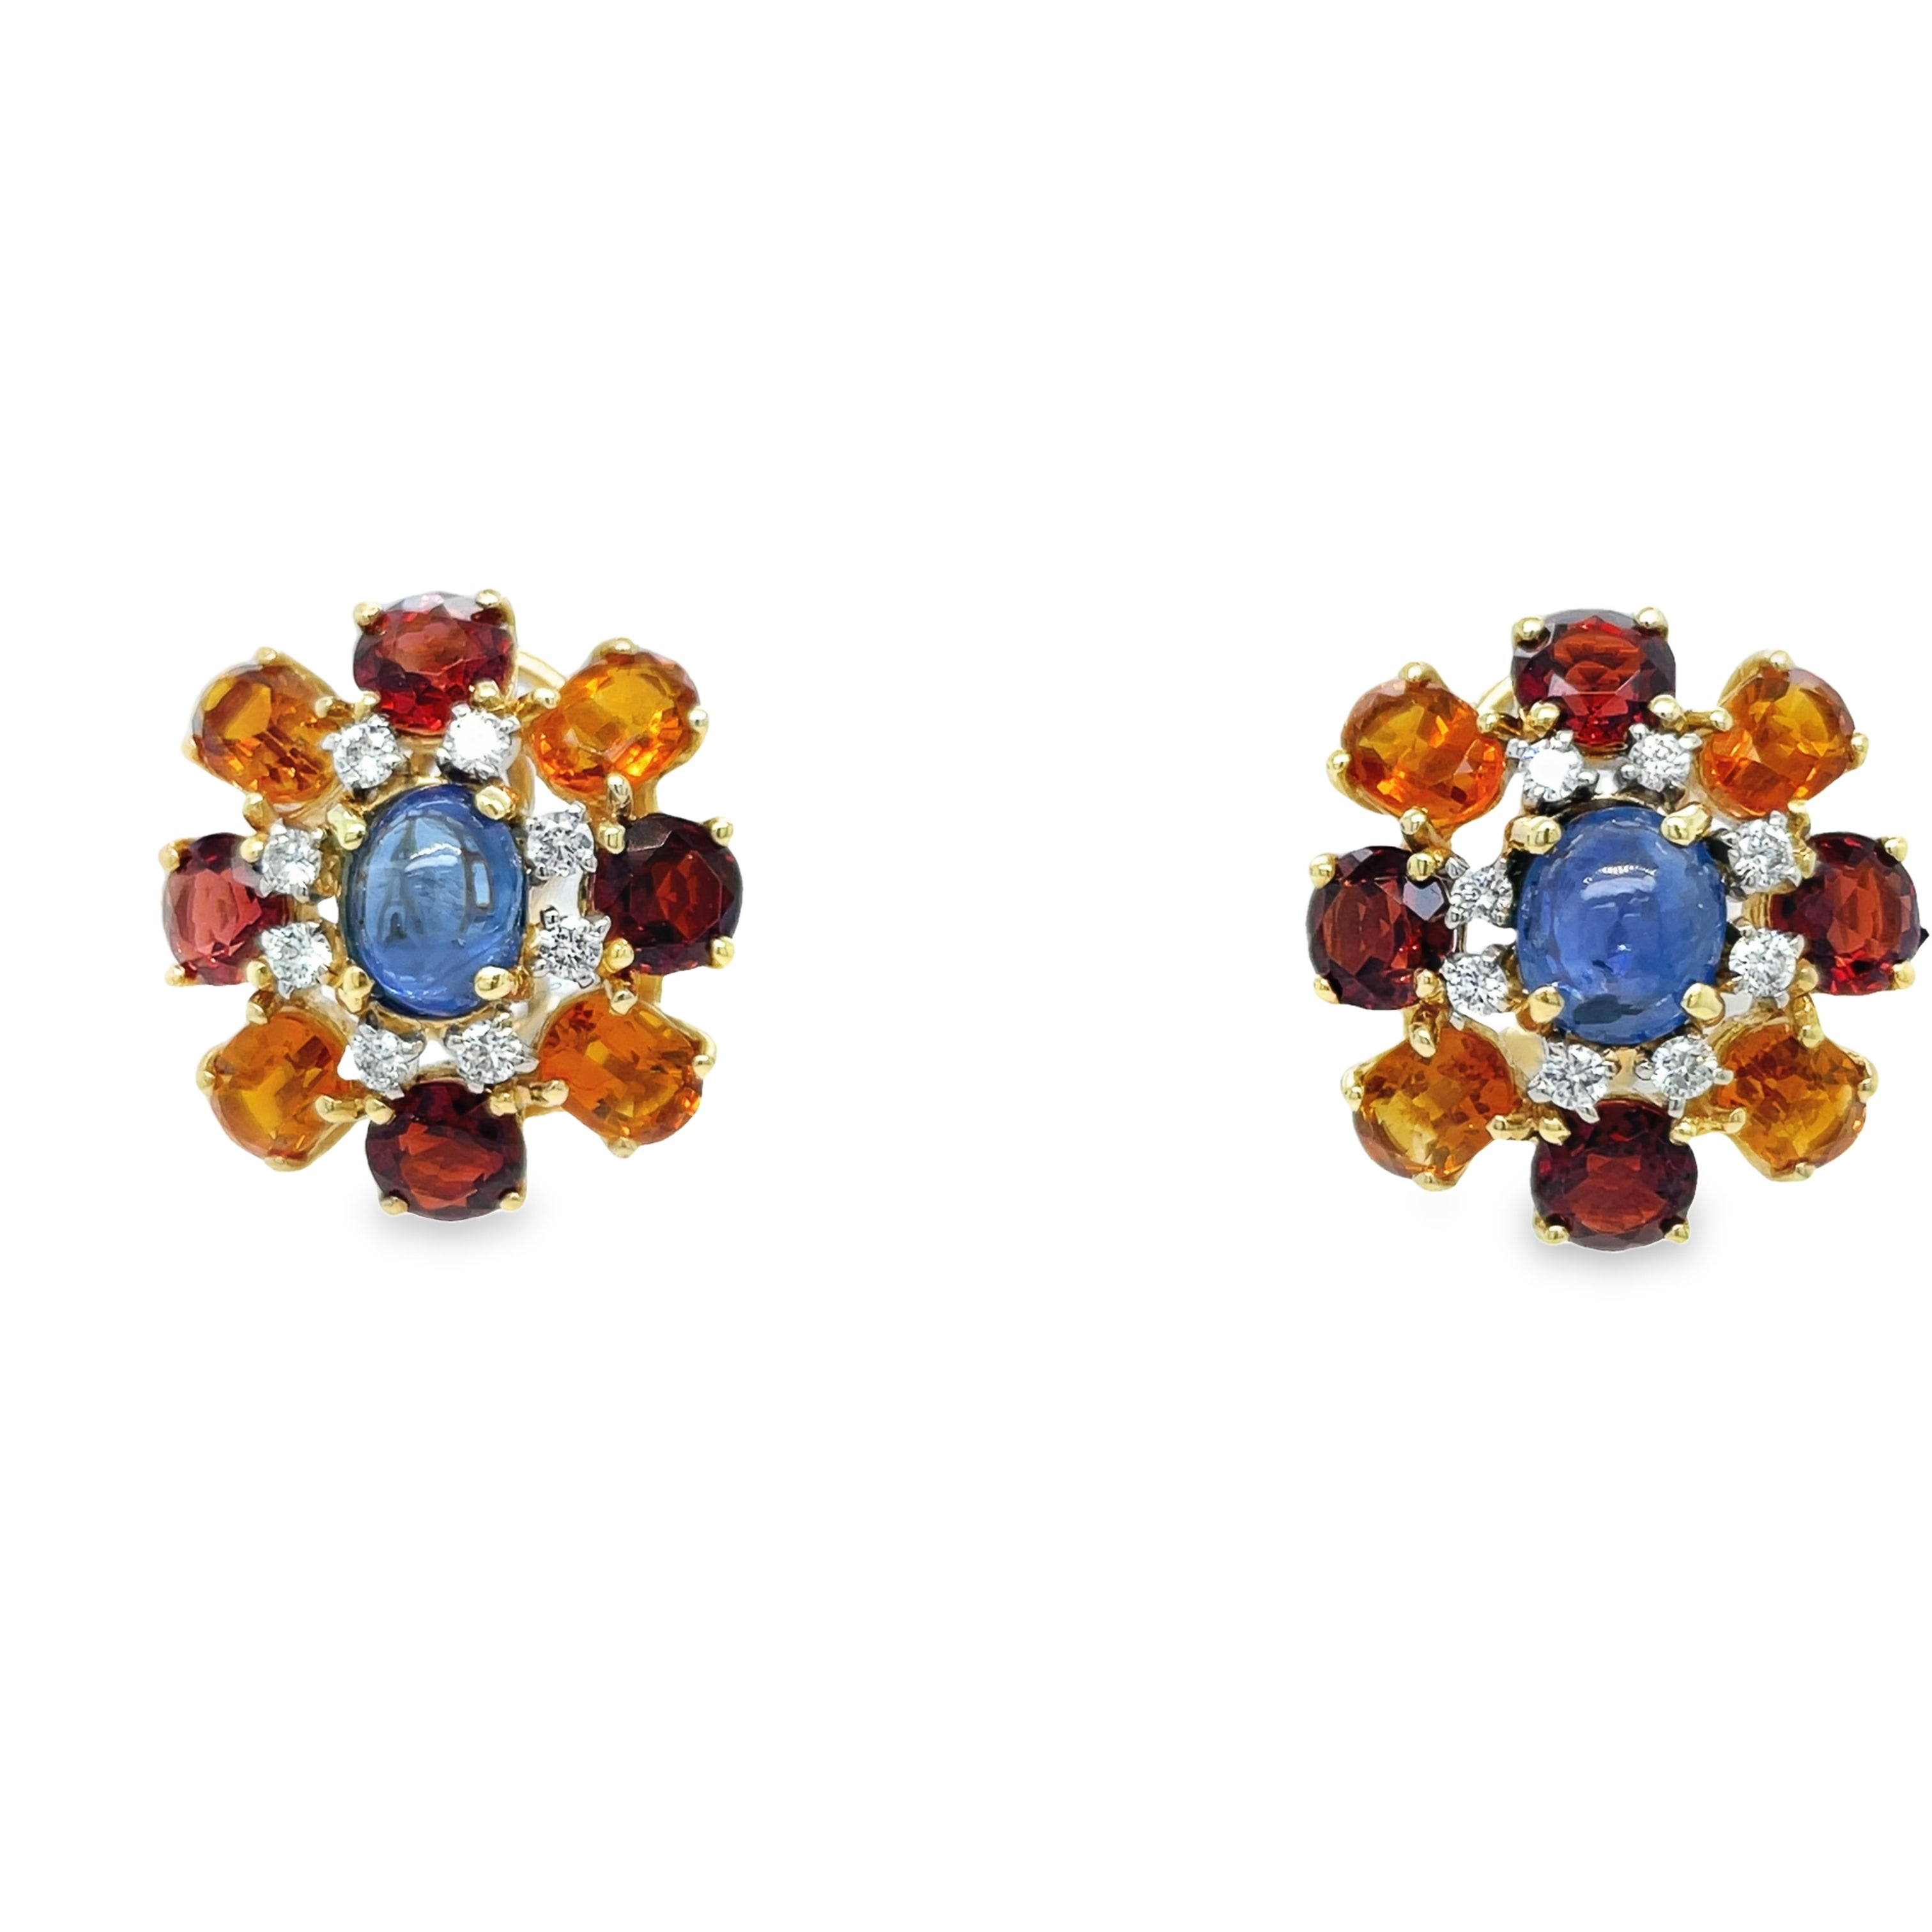 Add a touch of elegance to any outfit with our Flower Motif Sapphire and Citrine Diamond Earrings. Made with 14k yellow gold and featuring secure omega systems, these earrings showcase multi-colored and fancy shaped citrines, as well as round diamonds and two cabochon sapphires, creating a dazzling and unique look. Perfect for any occasion, these earrings are a must-have for any jewelry collection.